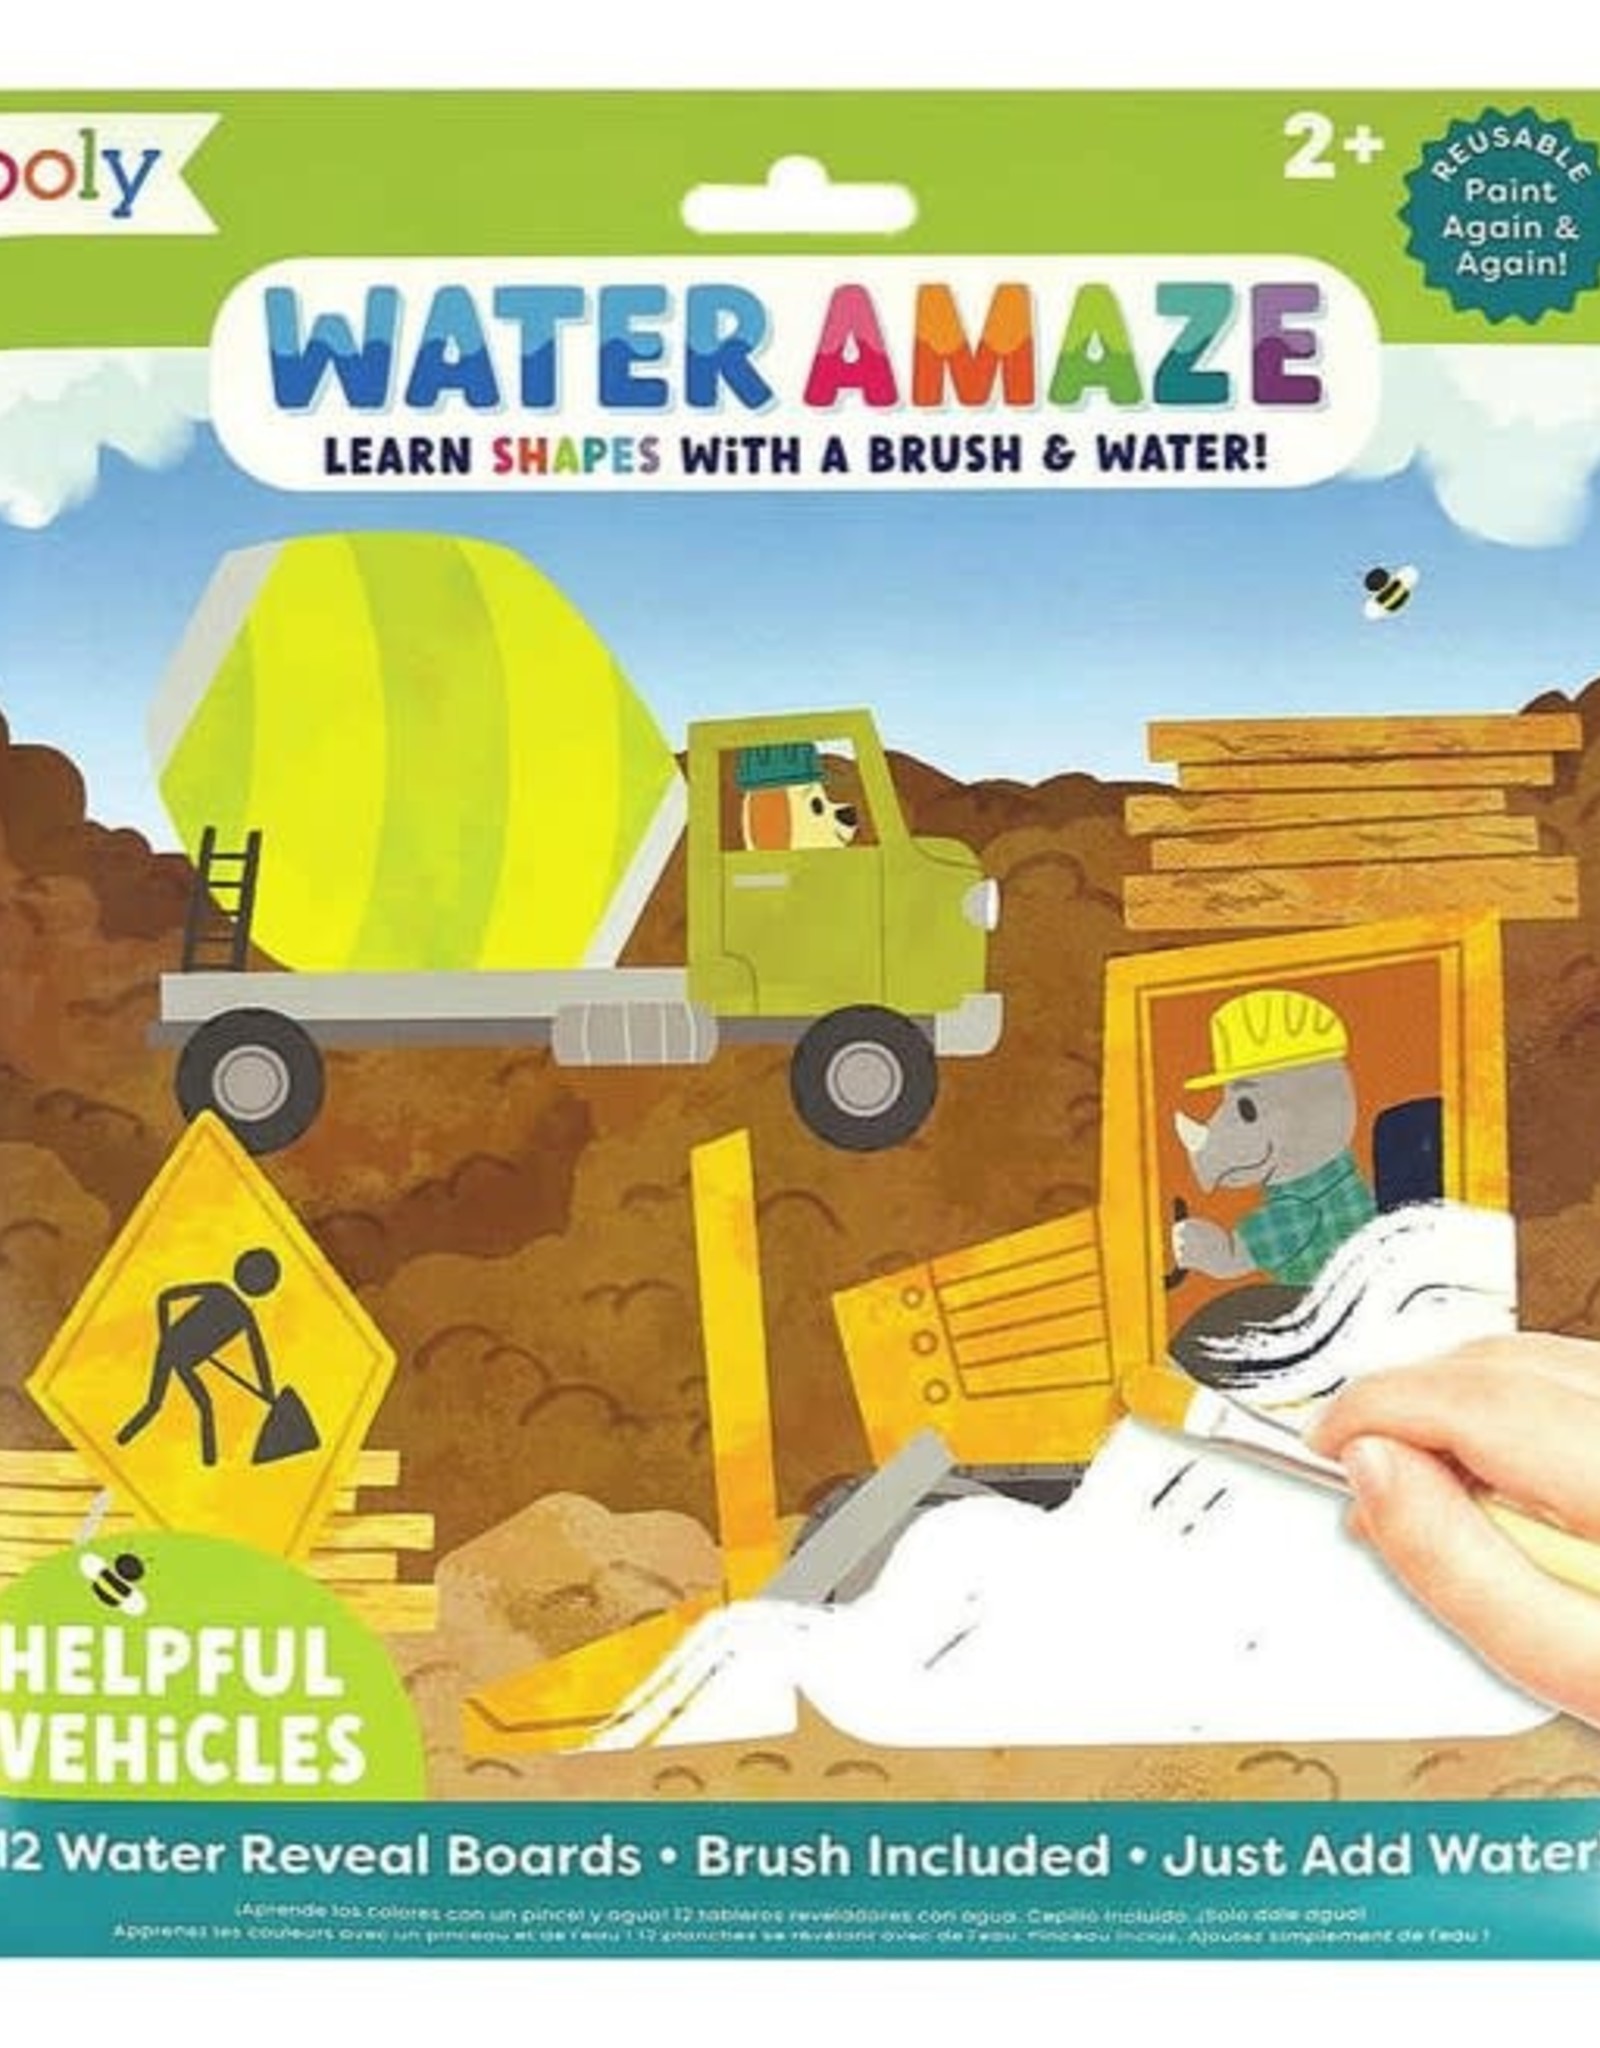 OOLY WATER AMAZE WATER REVEAL BOARDS - HELPFUL VEHICLES